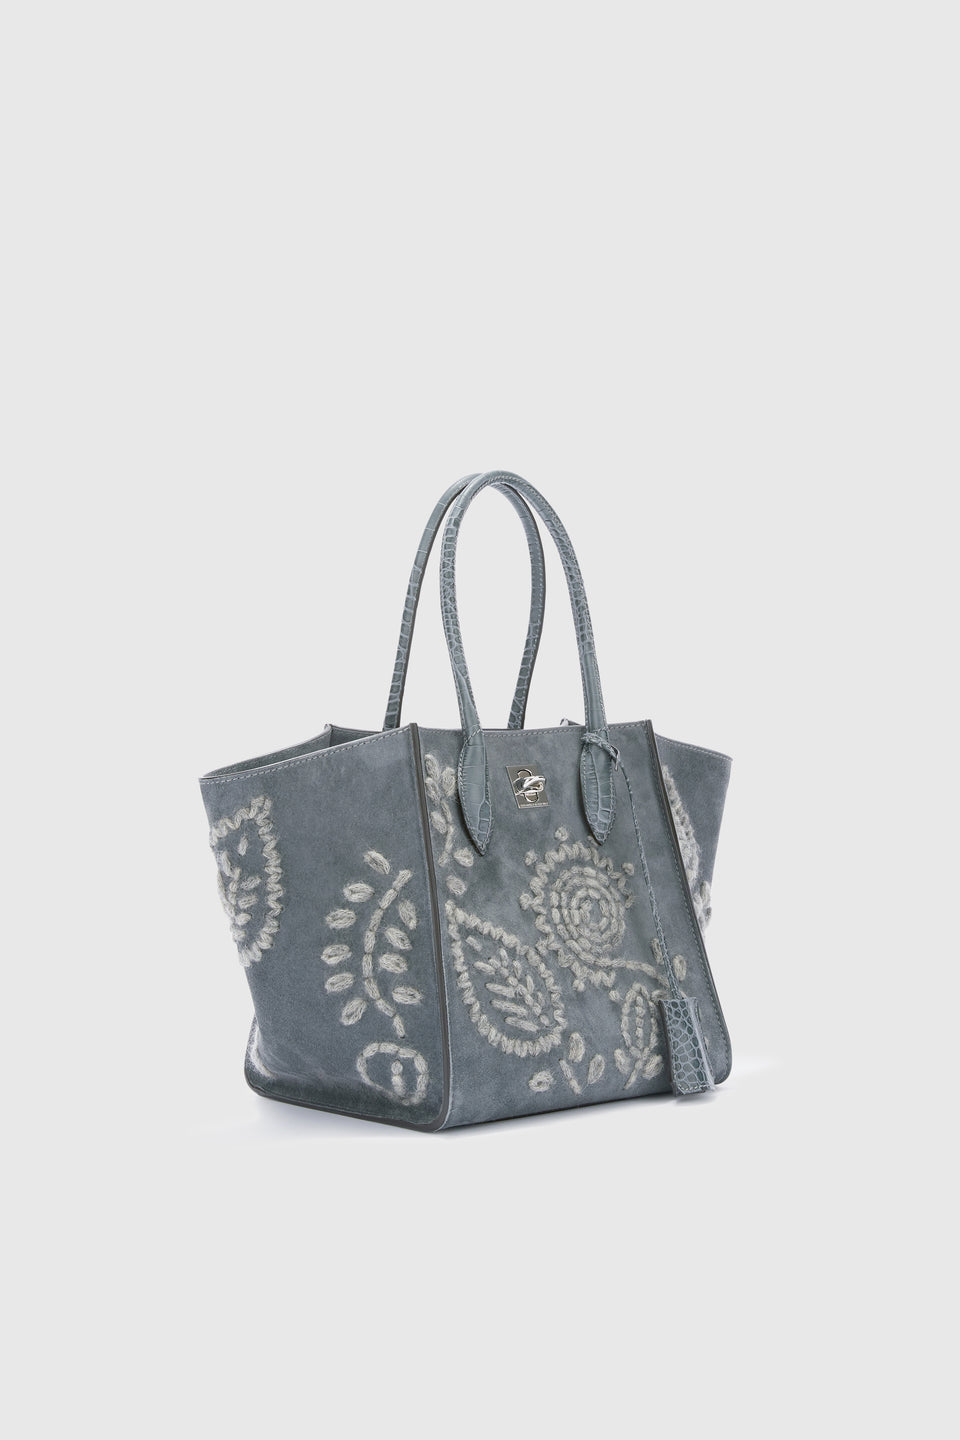 ''Maggie'' tote bag in gray leather